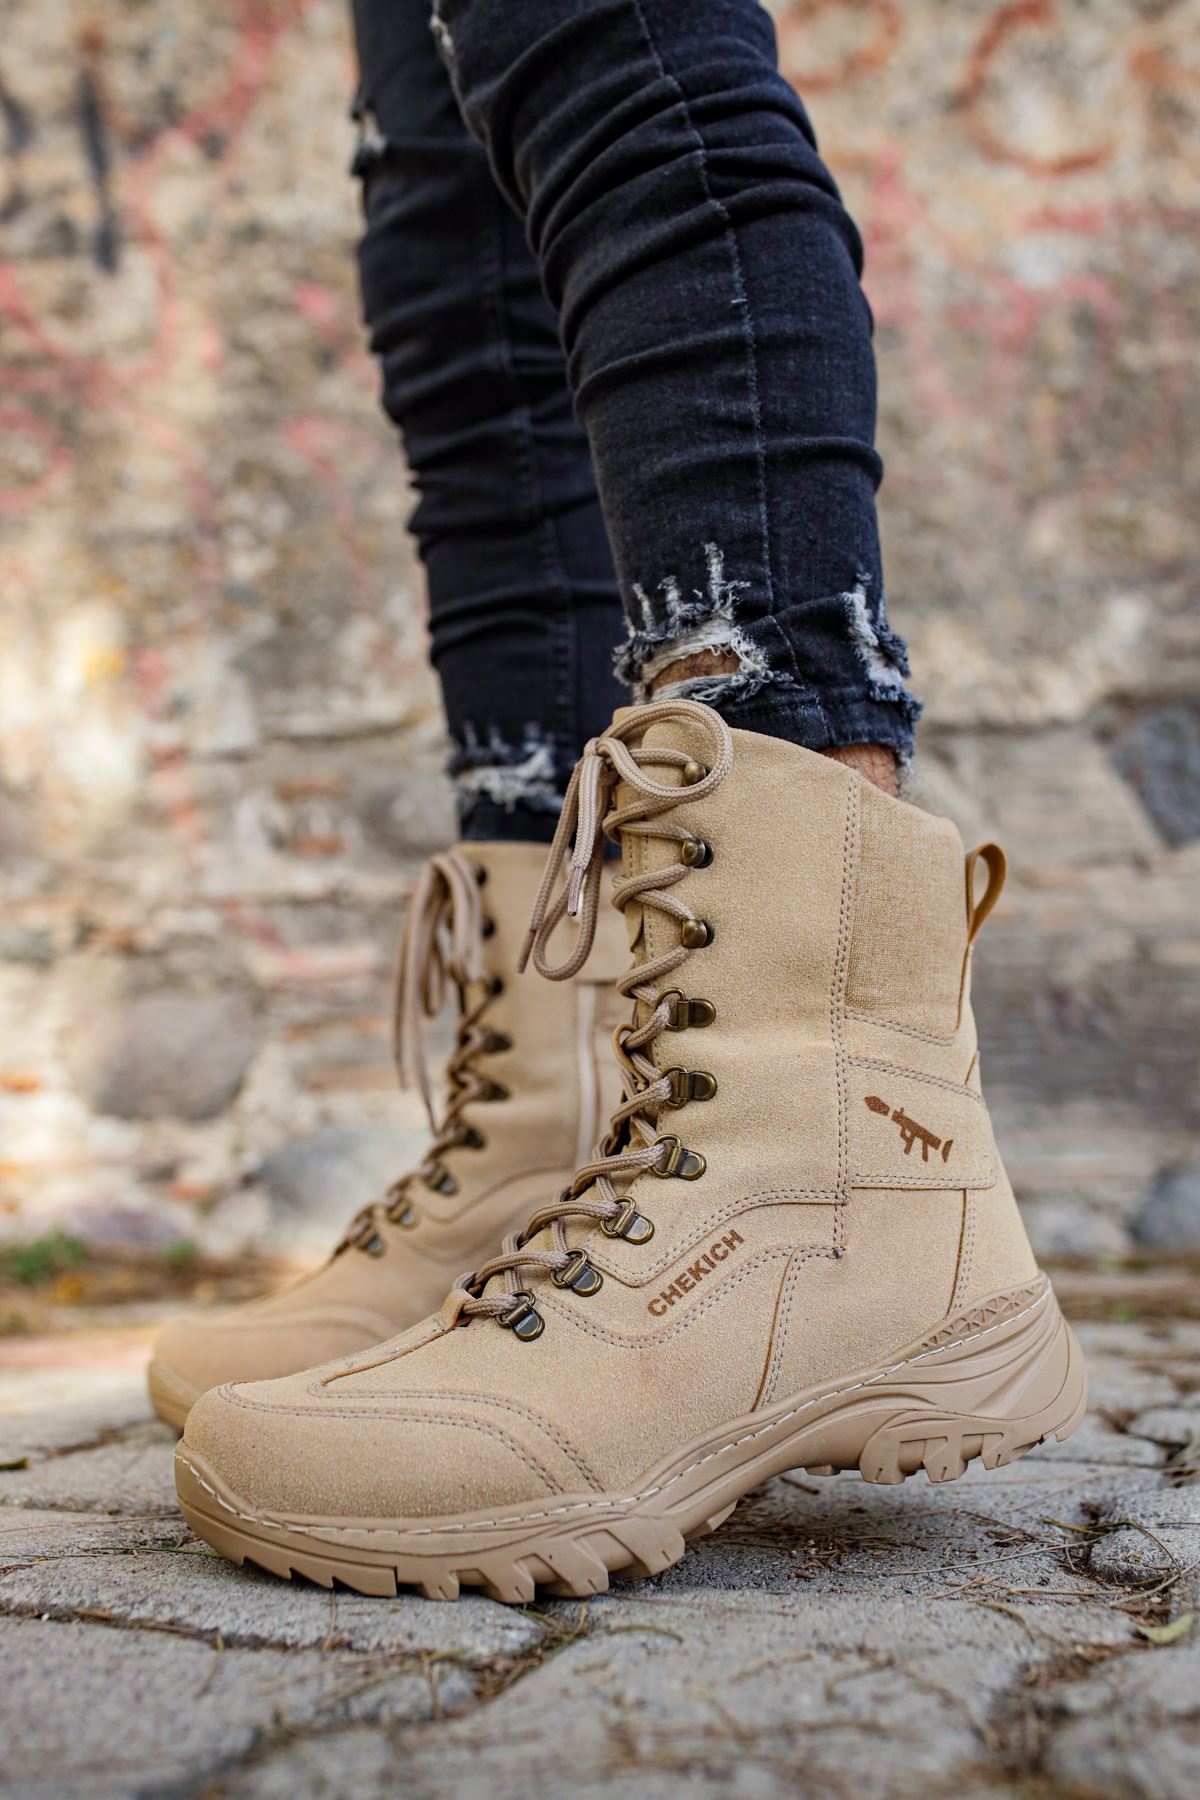 CH051 Suede Tactical Military Men's Sneaker Boots - Sand Color - STREETMODE™